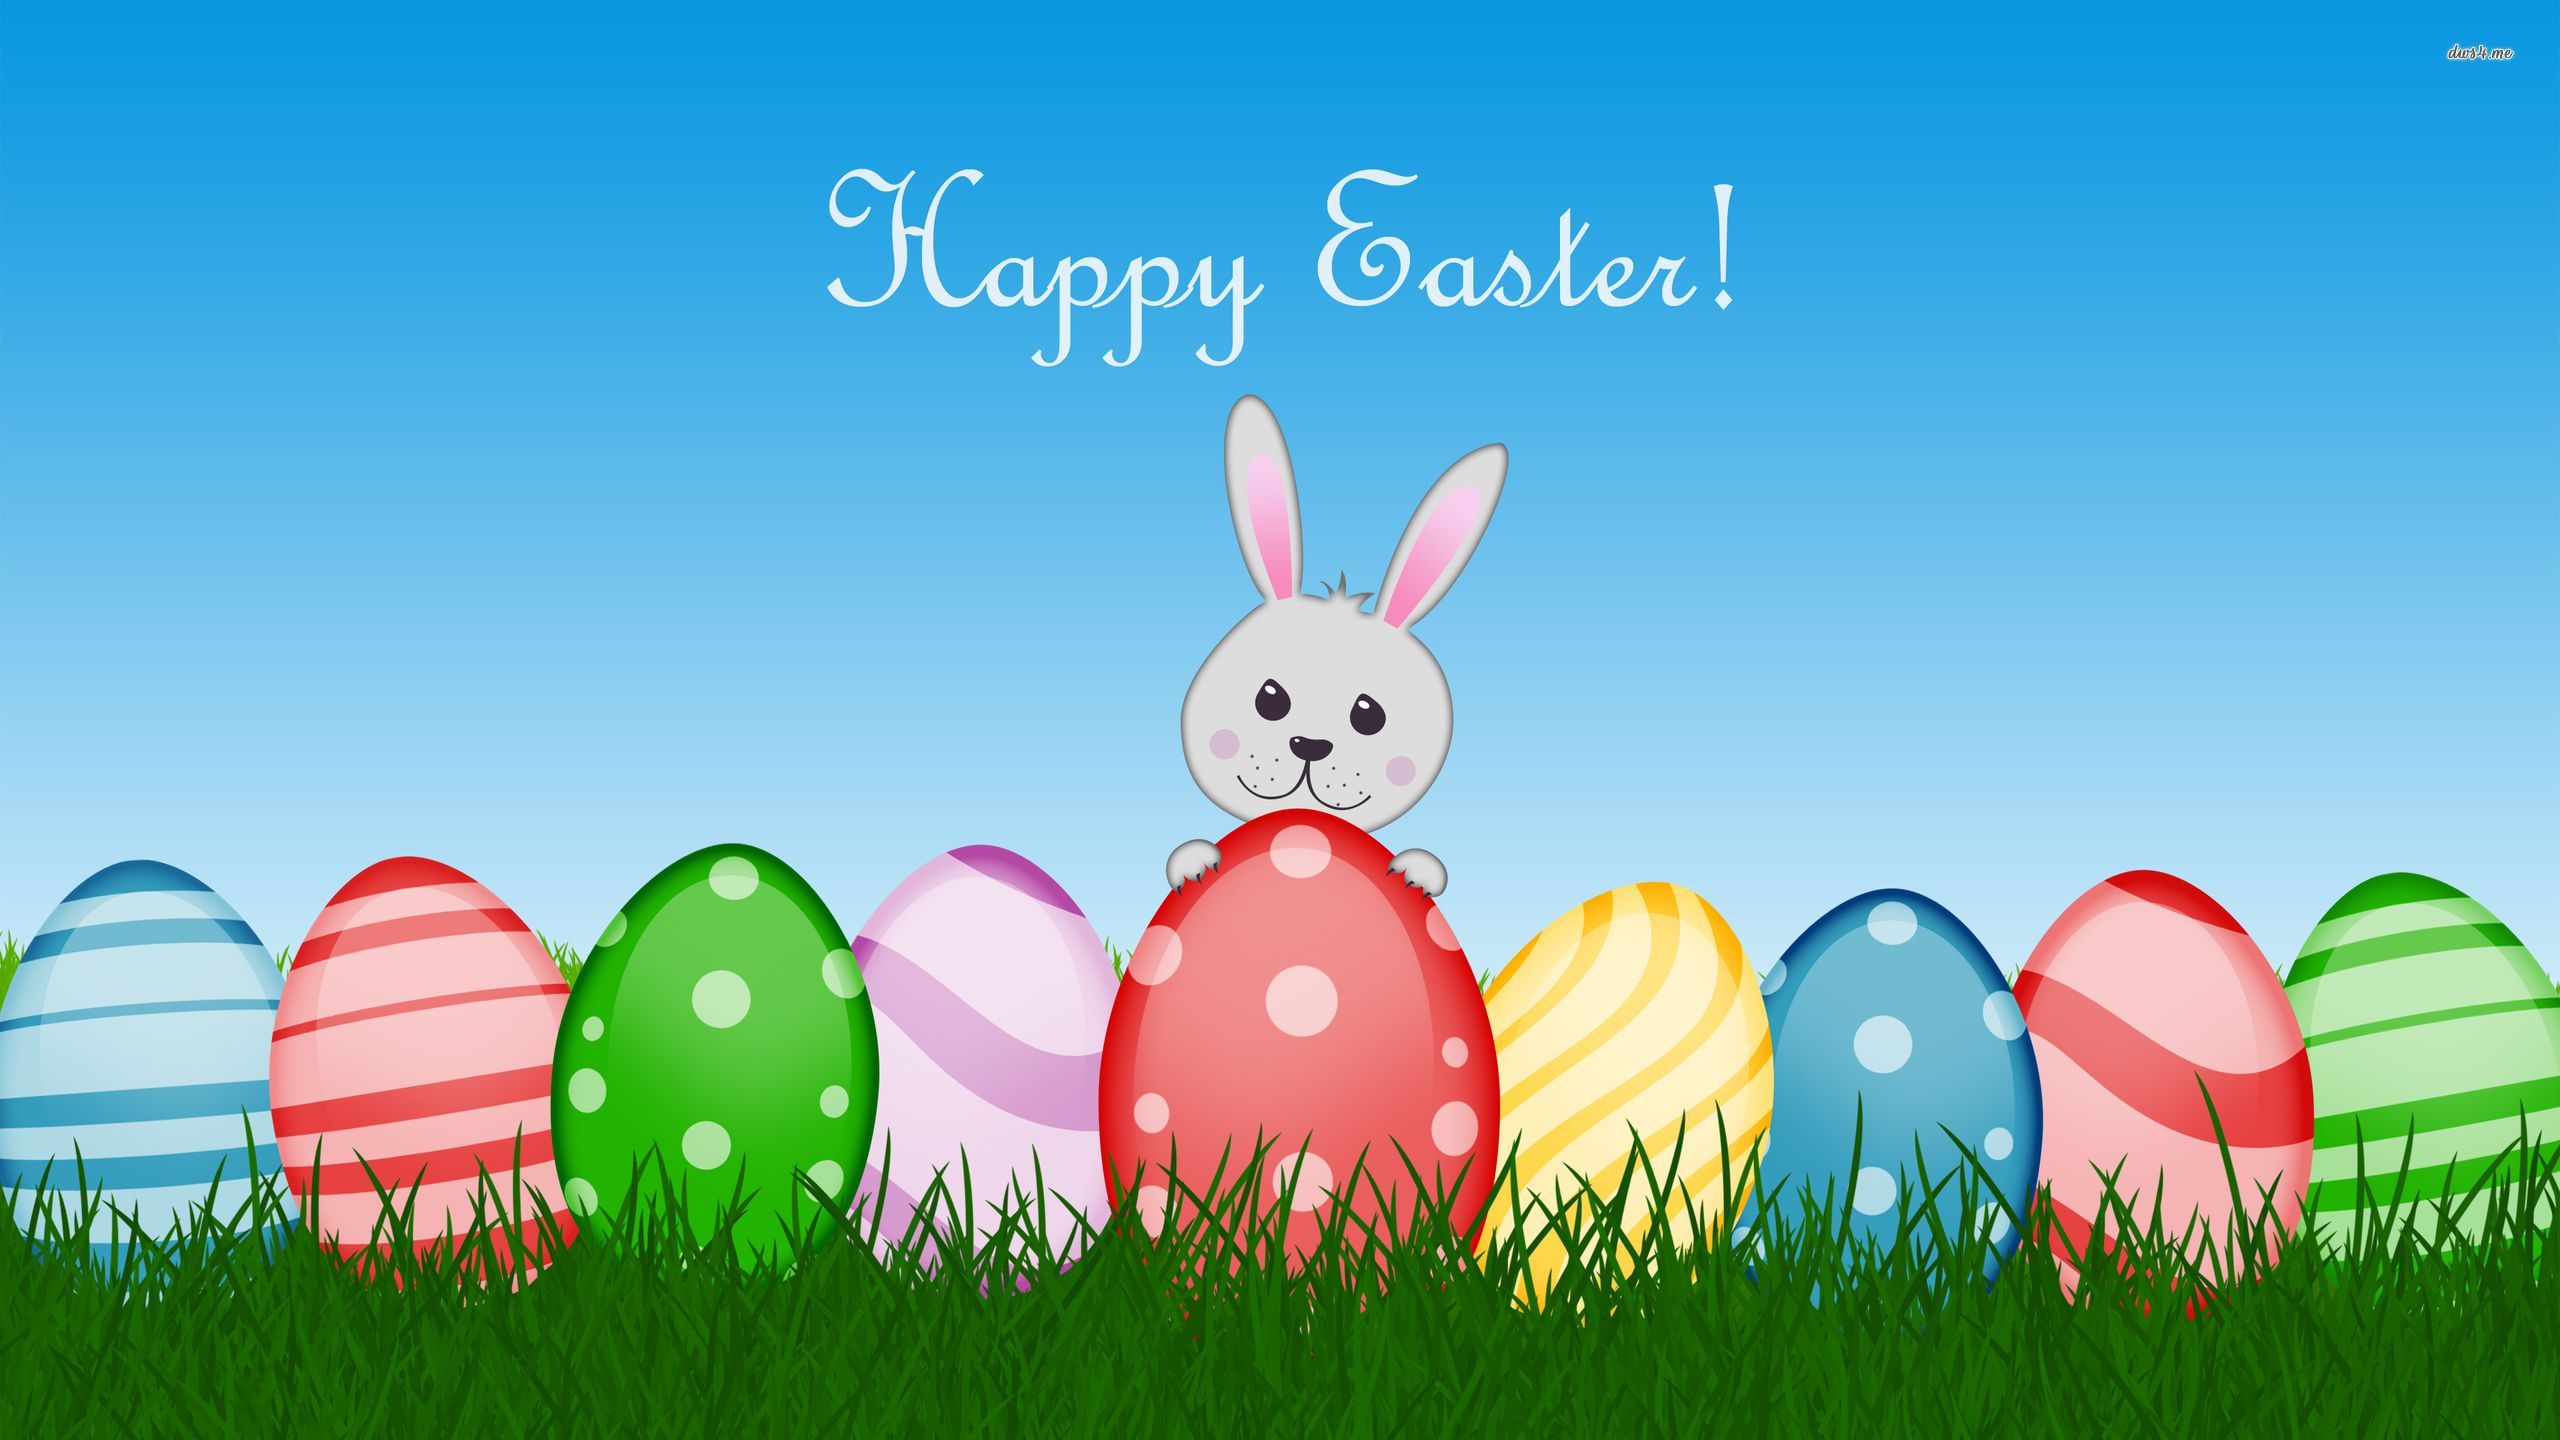 Happy Easter Wallpaper Background Image FreeCreatives. Easter bunny image, Happy easter wallpaper, Happy easter picture